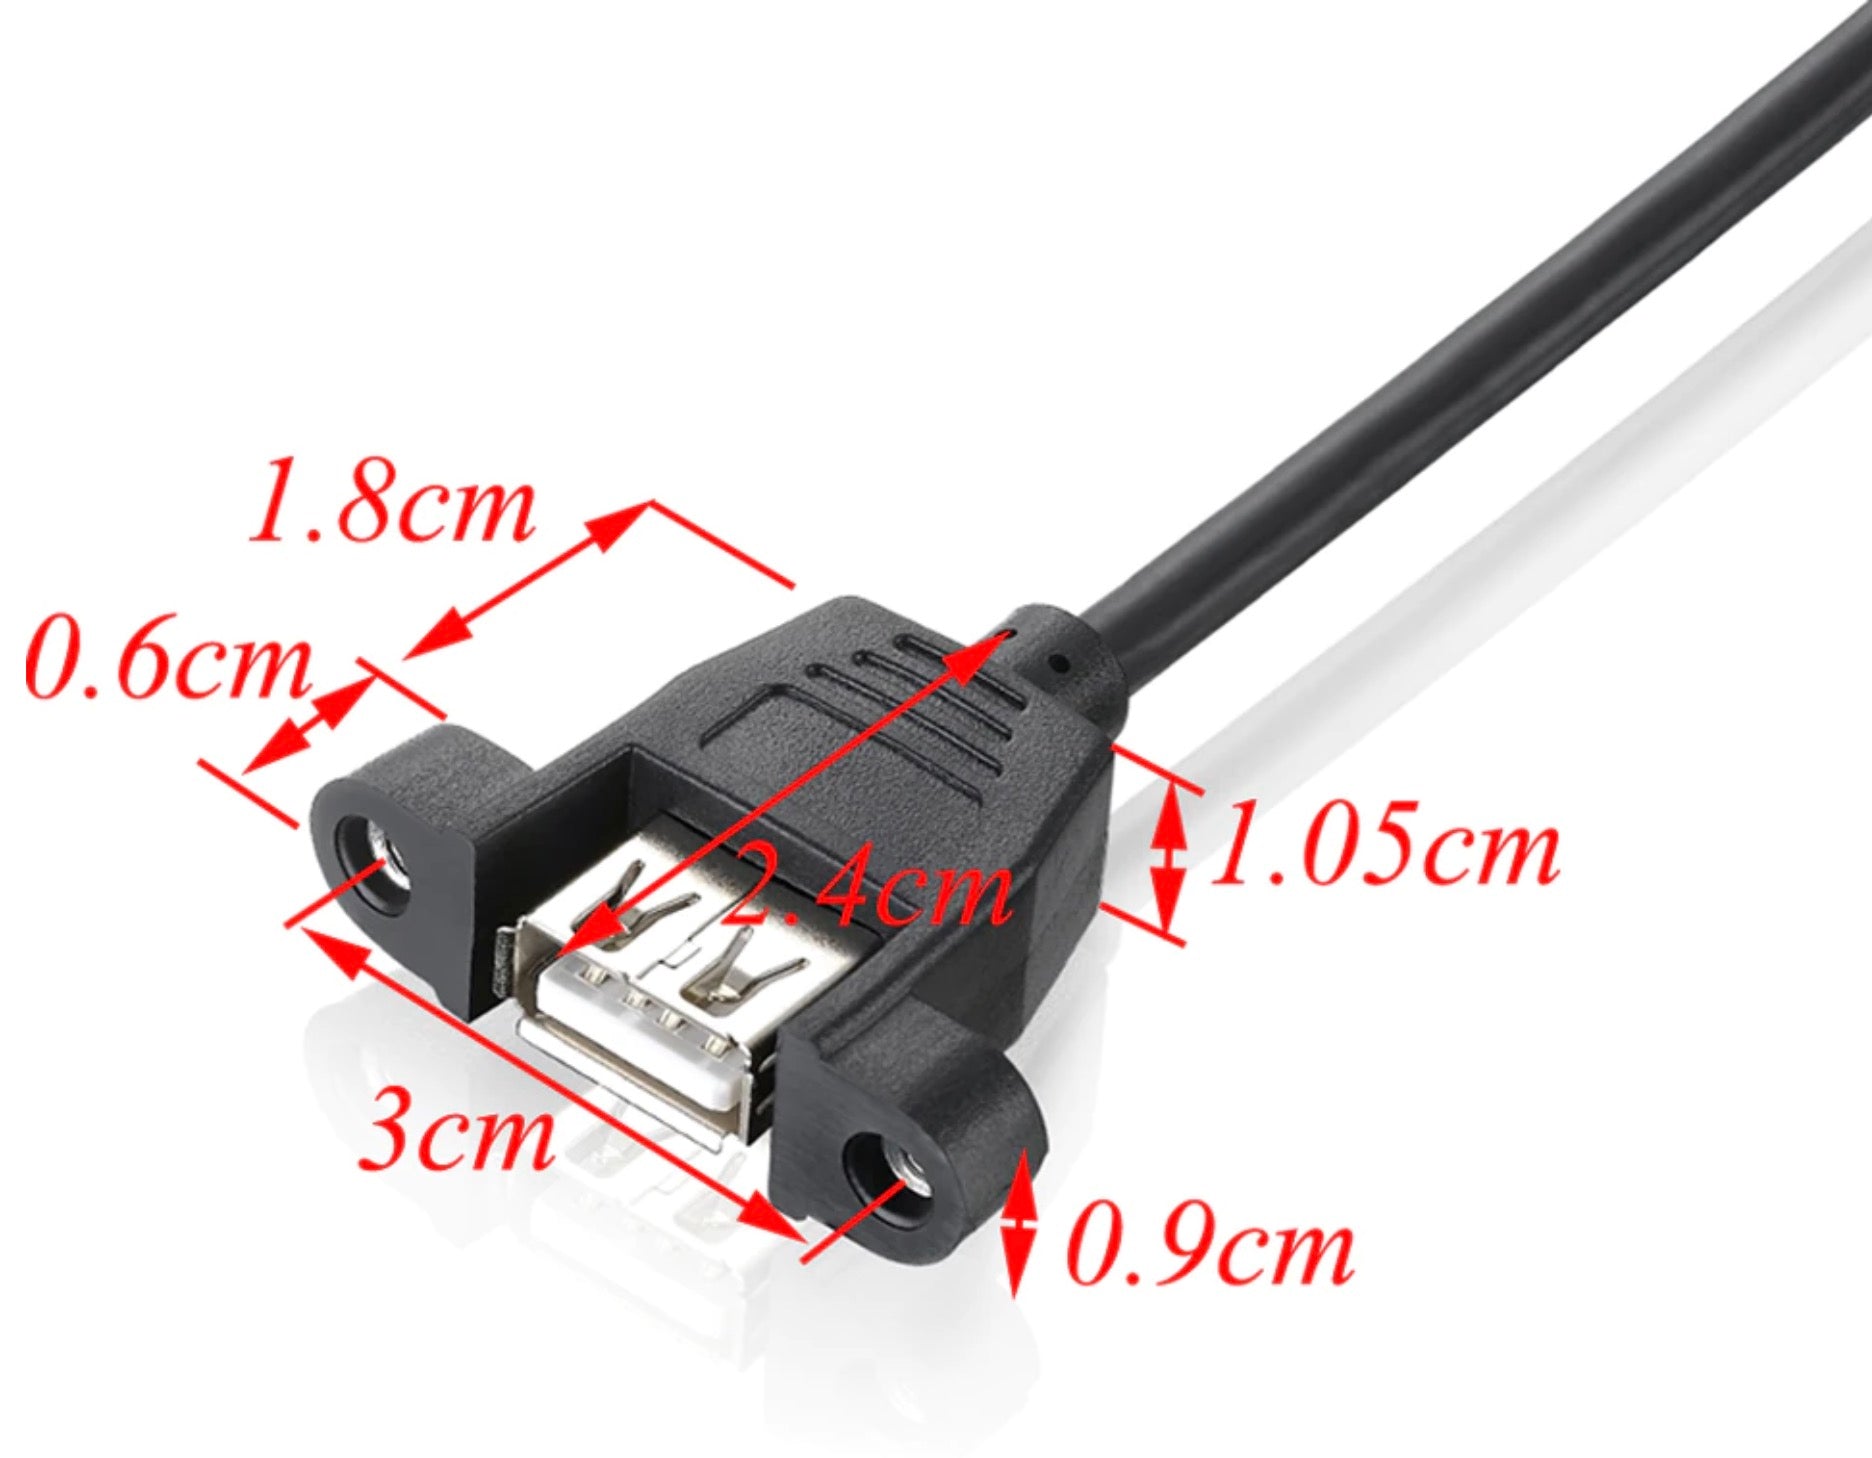 USB 2.0 Type A Male to Female Panel Mount Extension Cable 1m